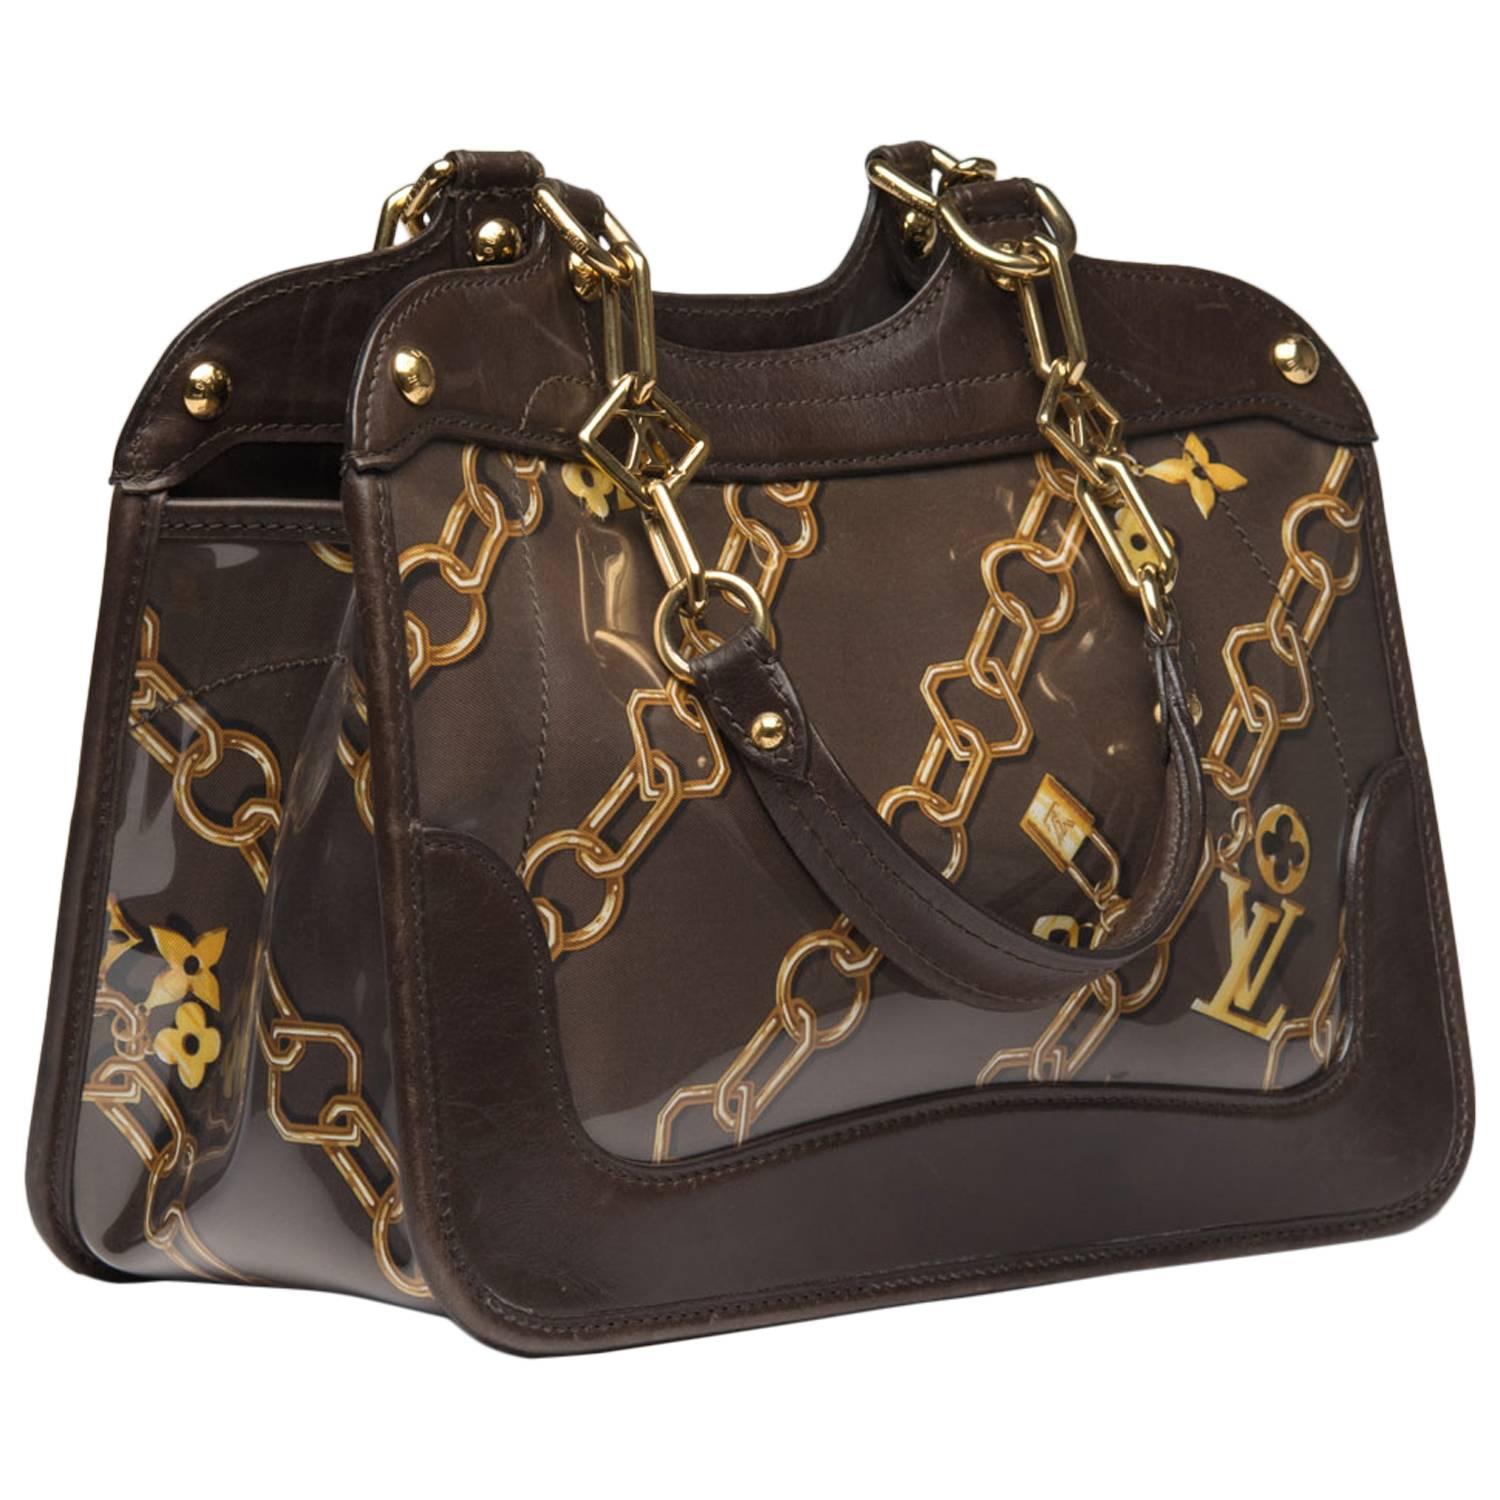 2006 Limited Edition Louis Vuitton By Marc Jacobs Bag 